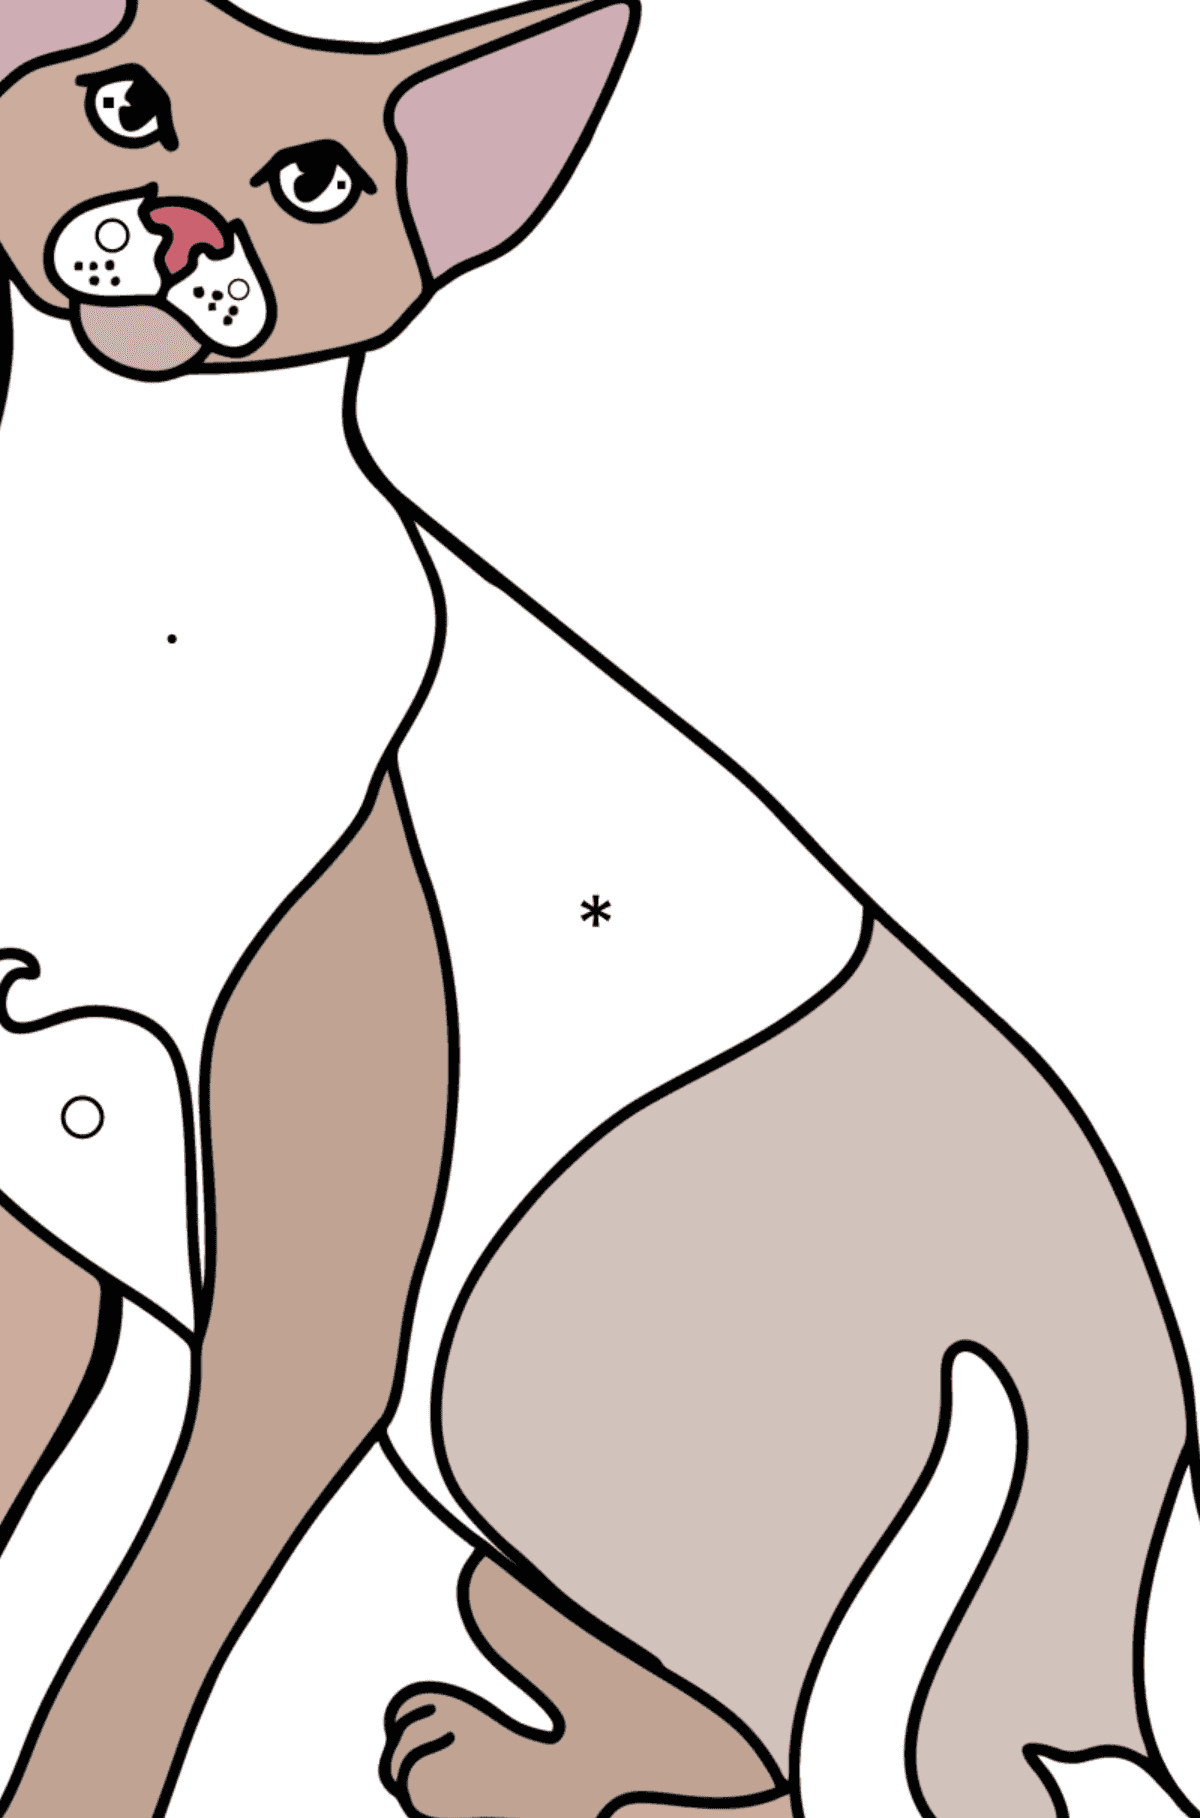 Oriental Shorthair Cat coloring page - Coloring by Symbols and Geometric Shapes for Kids